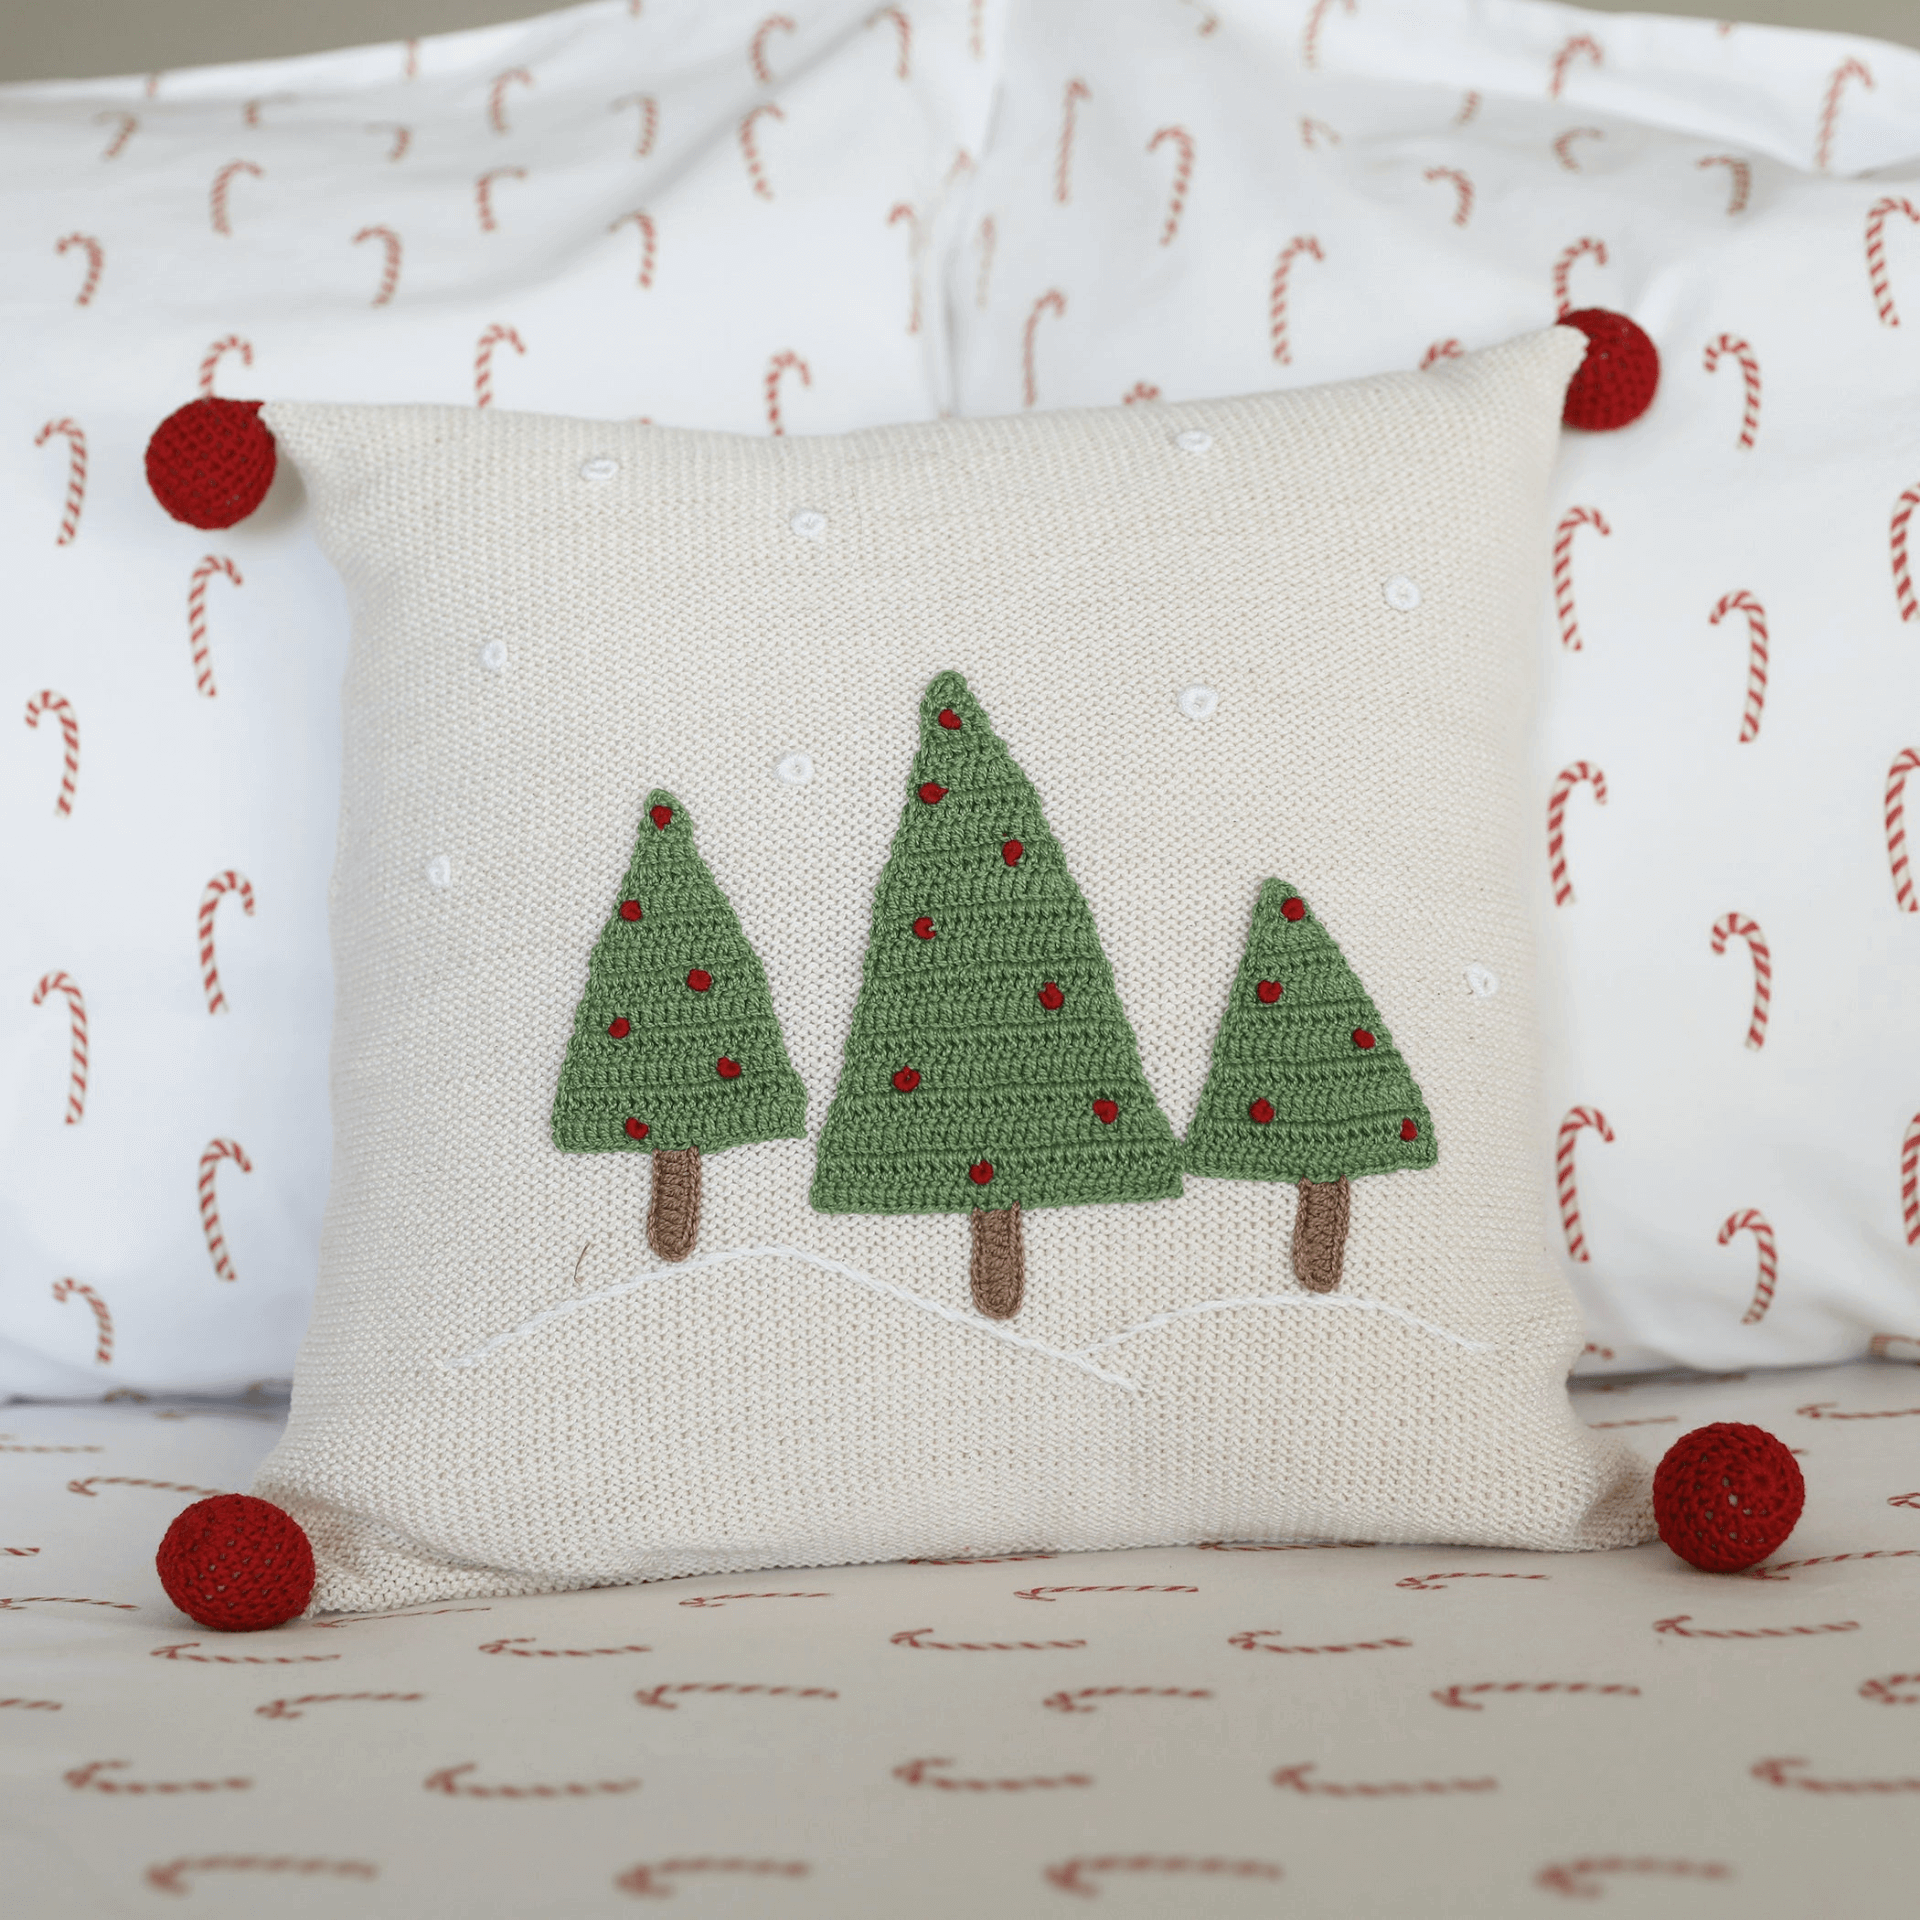 3 tree 12 inch pillow